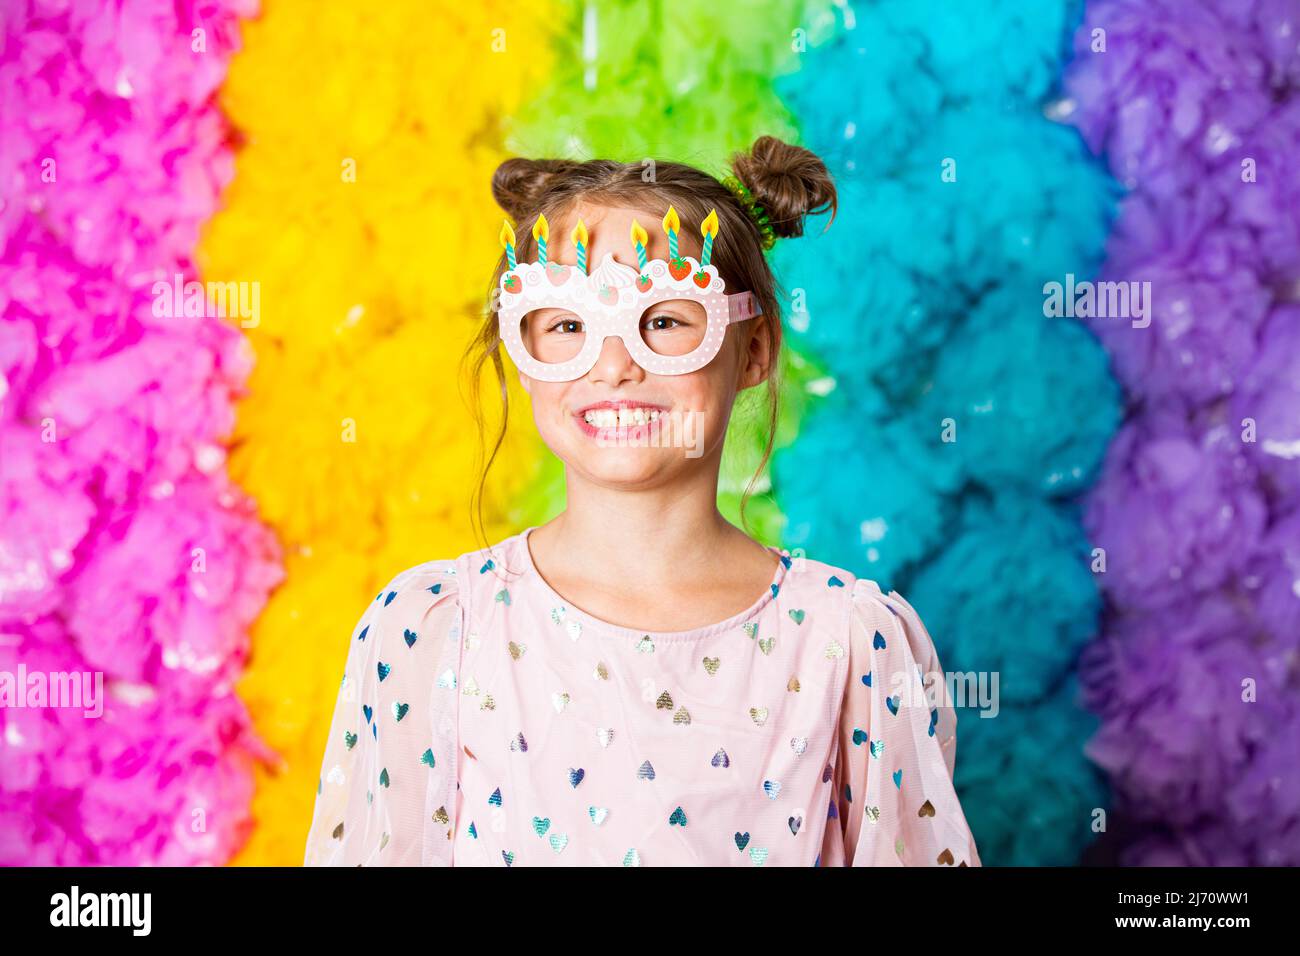 Cute girl celebrating birthday, wearing party paper glasses, laughing and having fun. Bright rainbow coloured background. Happy event. Stock Photo